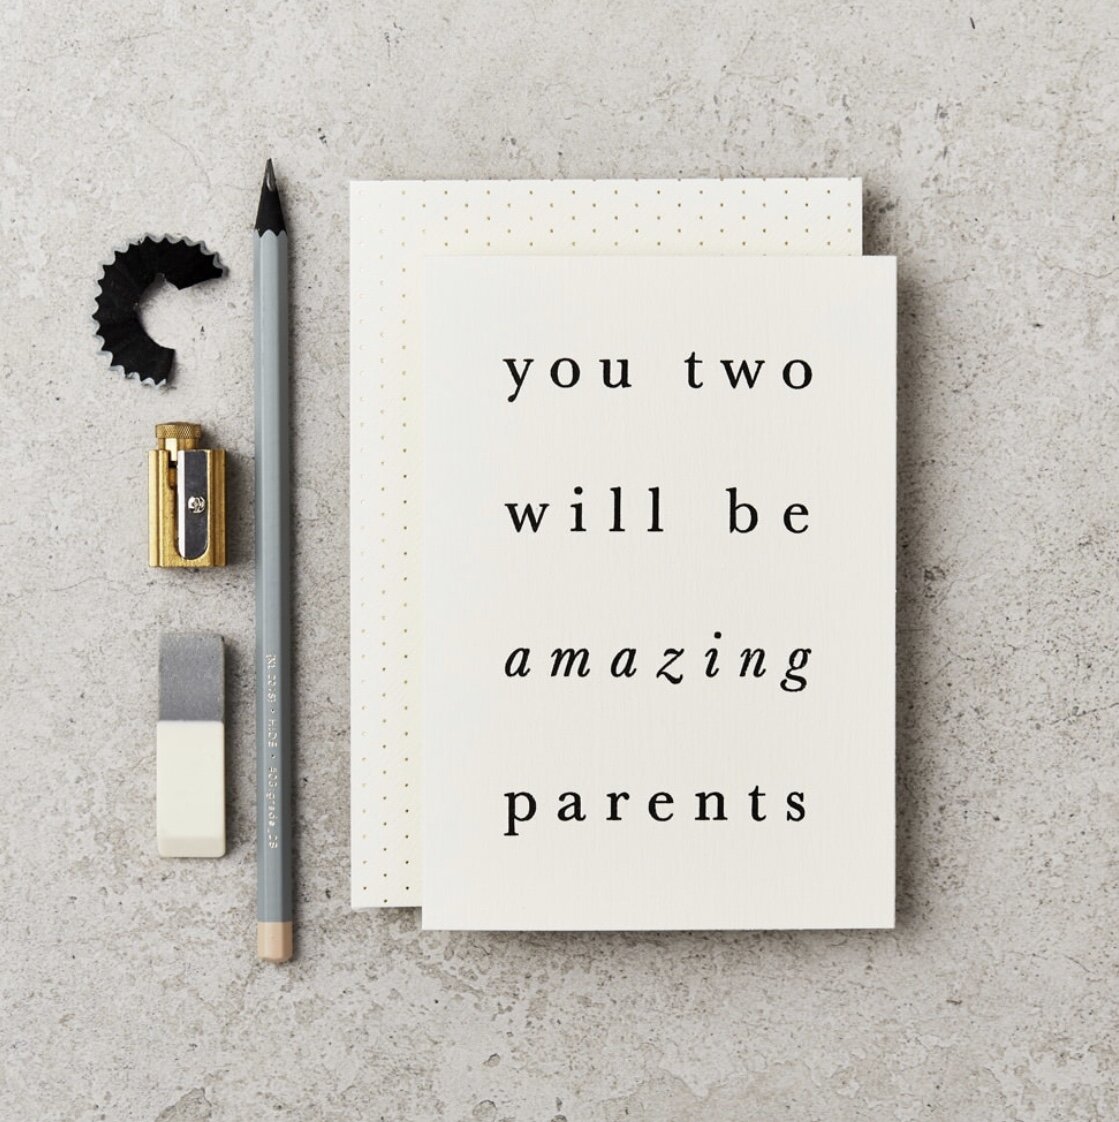 YOU TWO WILL BE AMAZING PARENTS | CARD BY KATIE LEAMON